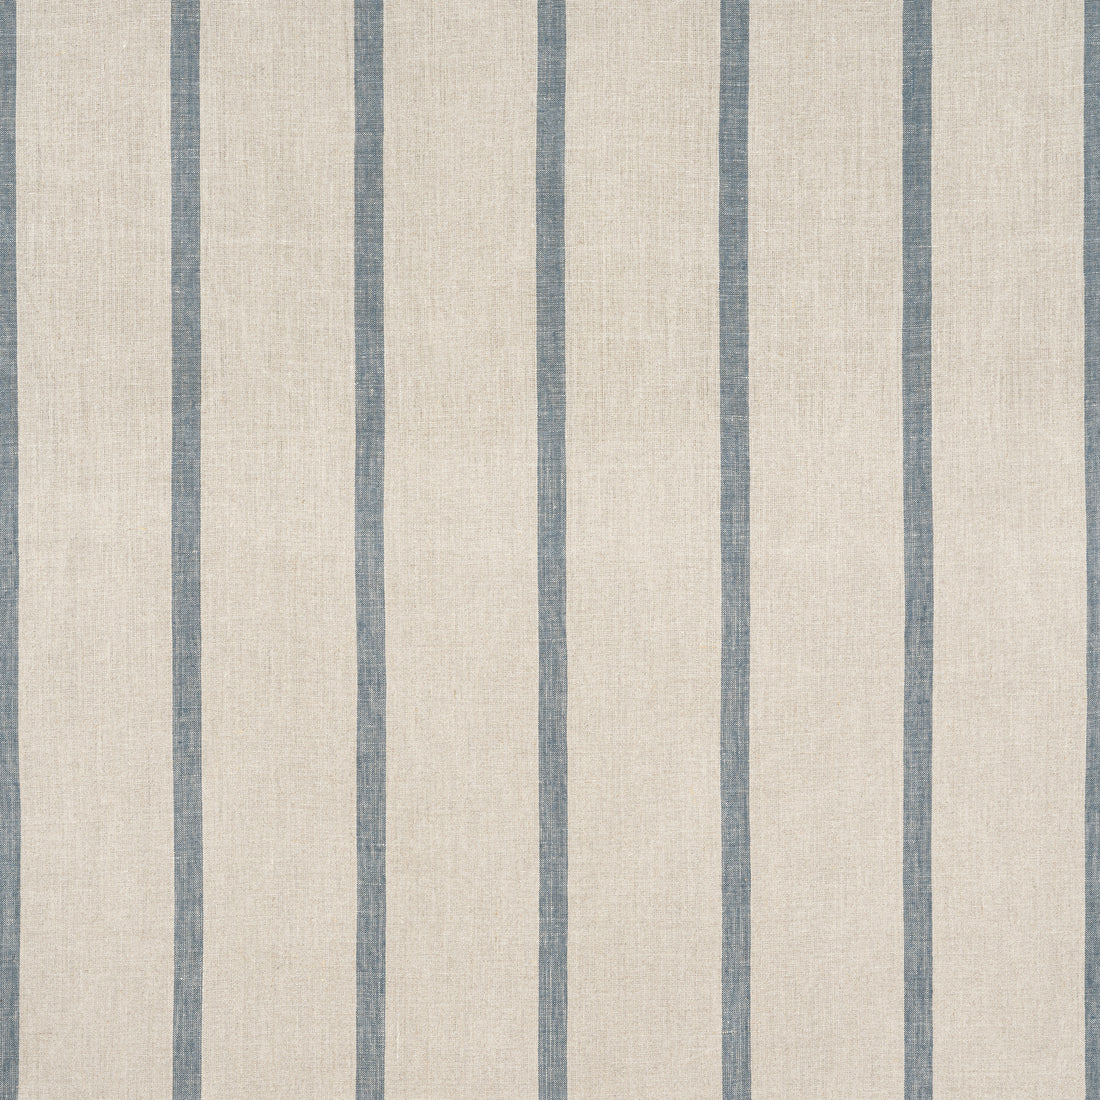 Sailing Stripe fabric in natural and slate color - pattern number AW15134 - by Anna French in the Antilles collection